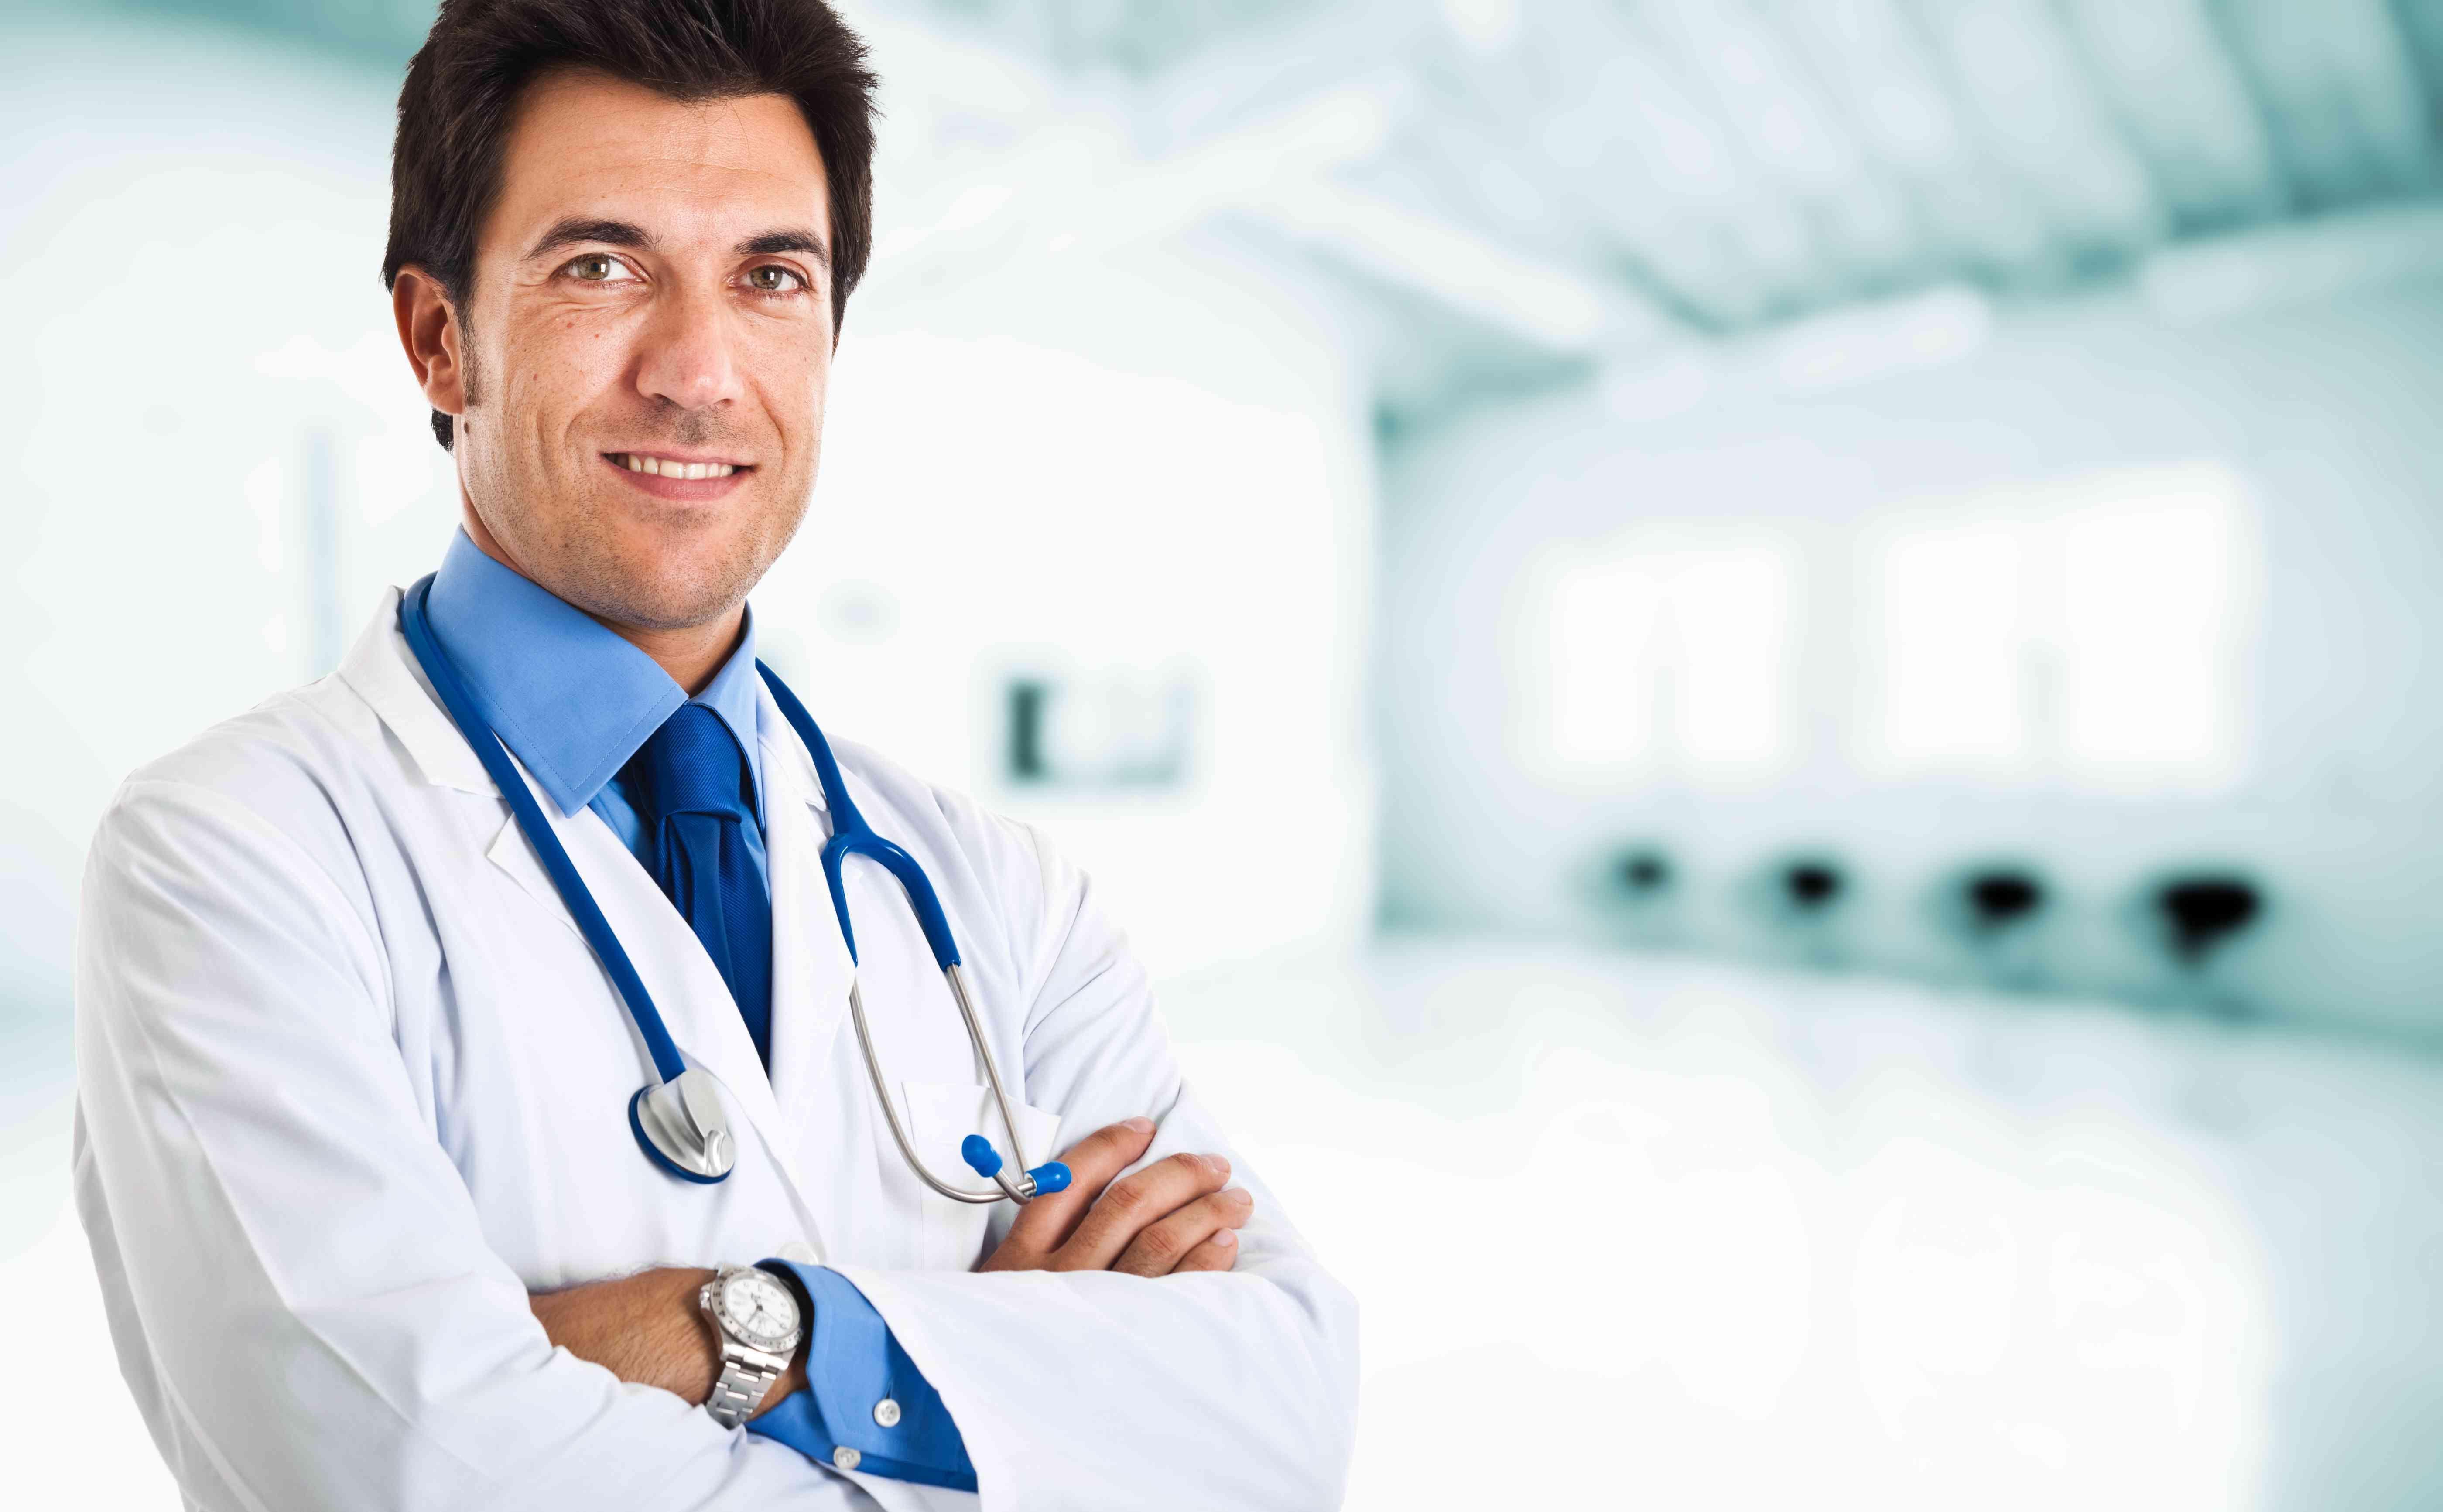 Awesome Doctor HD Wallpaper Free Download